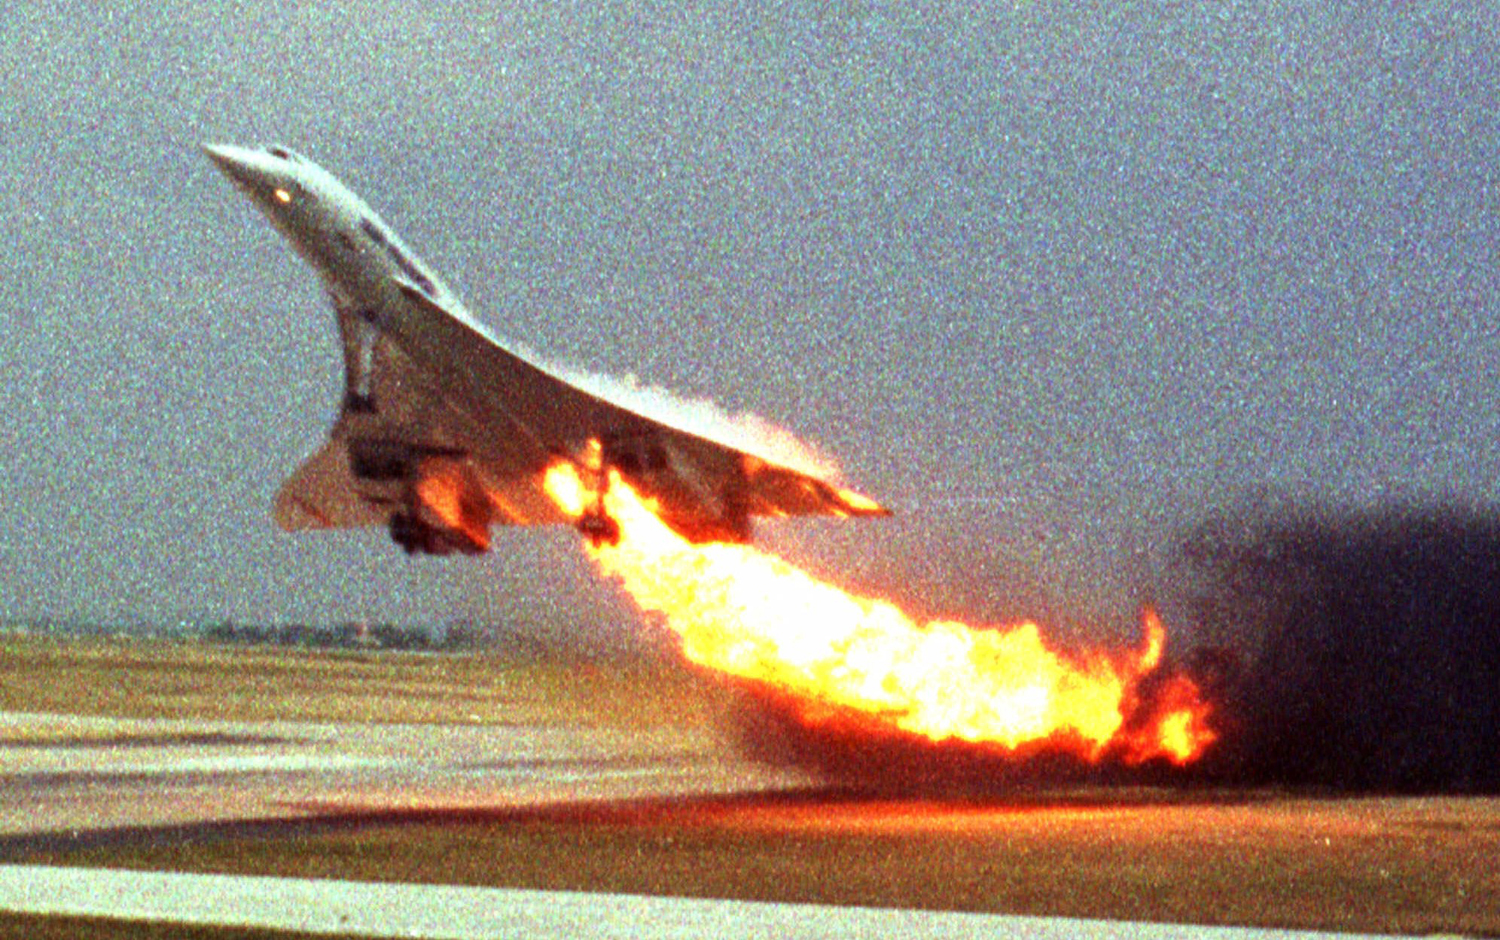 Air France Concorde flight 4590 takes off with fire trailing from its engine on the left wing from Charles de Gaulle airport in Paris on July 25, 2000. The plane crashed shortly after take-off, killing all the 109 people aboard and four others on the ground. A Japanese businessman Toshihiko Sato took this photo from inside another plane.